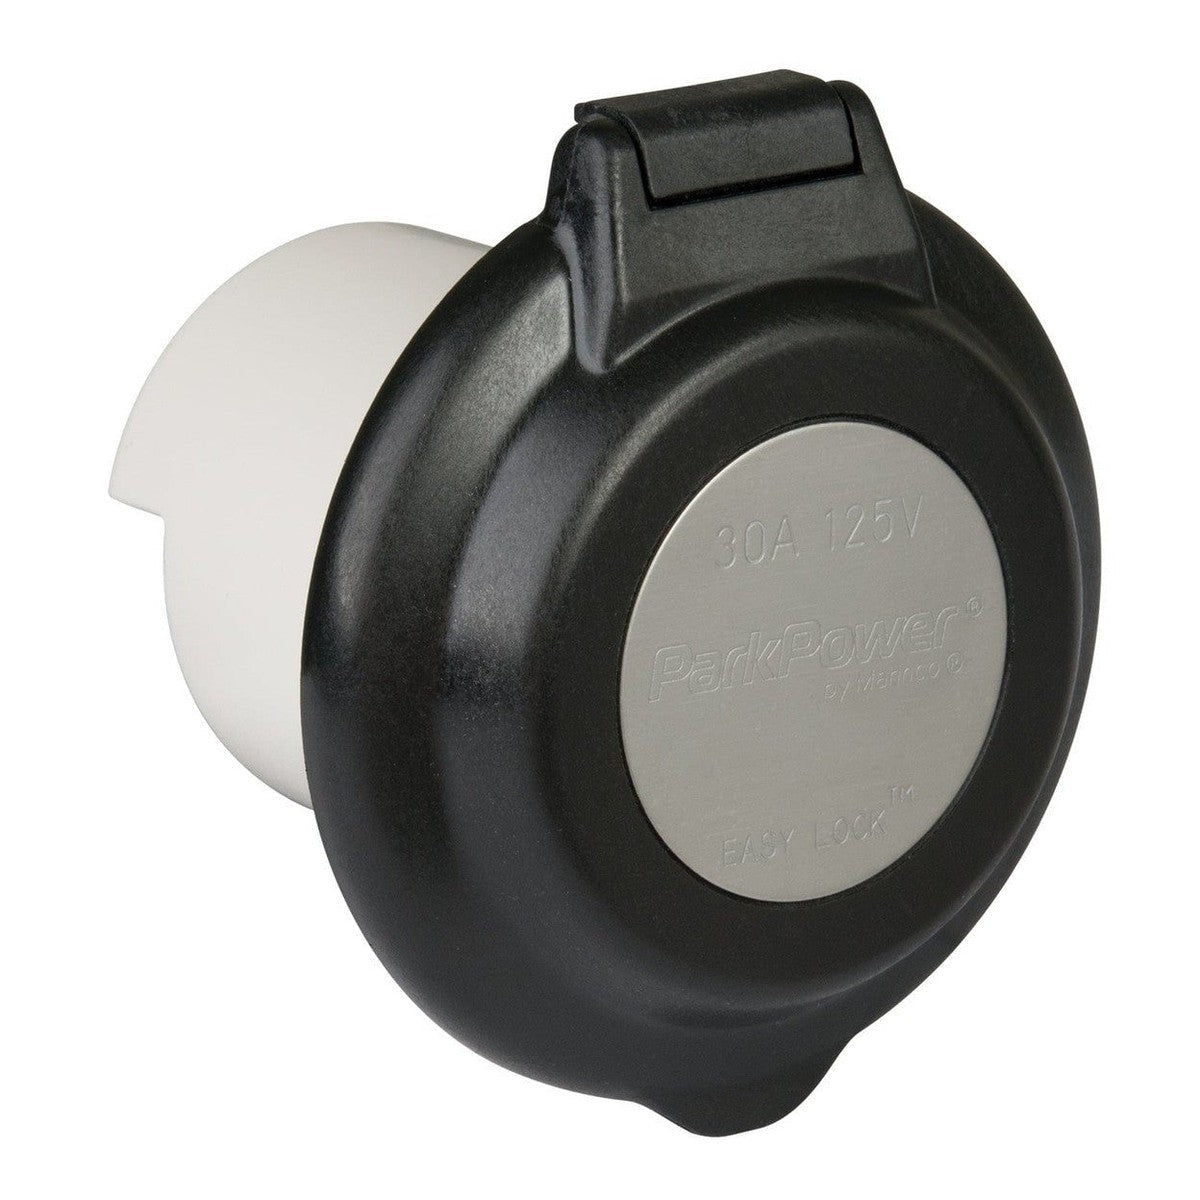 ParkPower Qualifies for Free Shipping ParkPower 30a Contoured Power Inlet #304EL-BRV.BLK